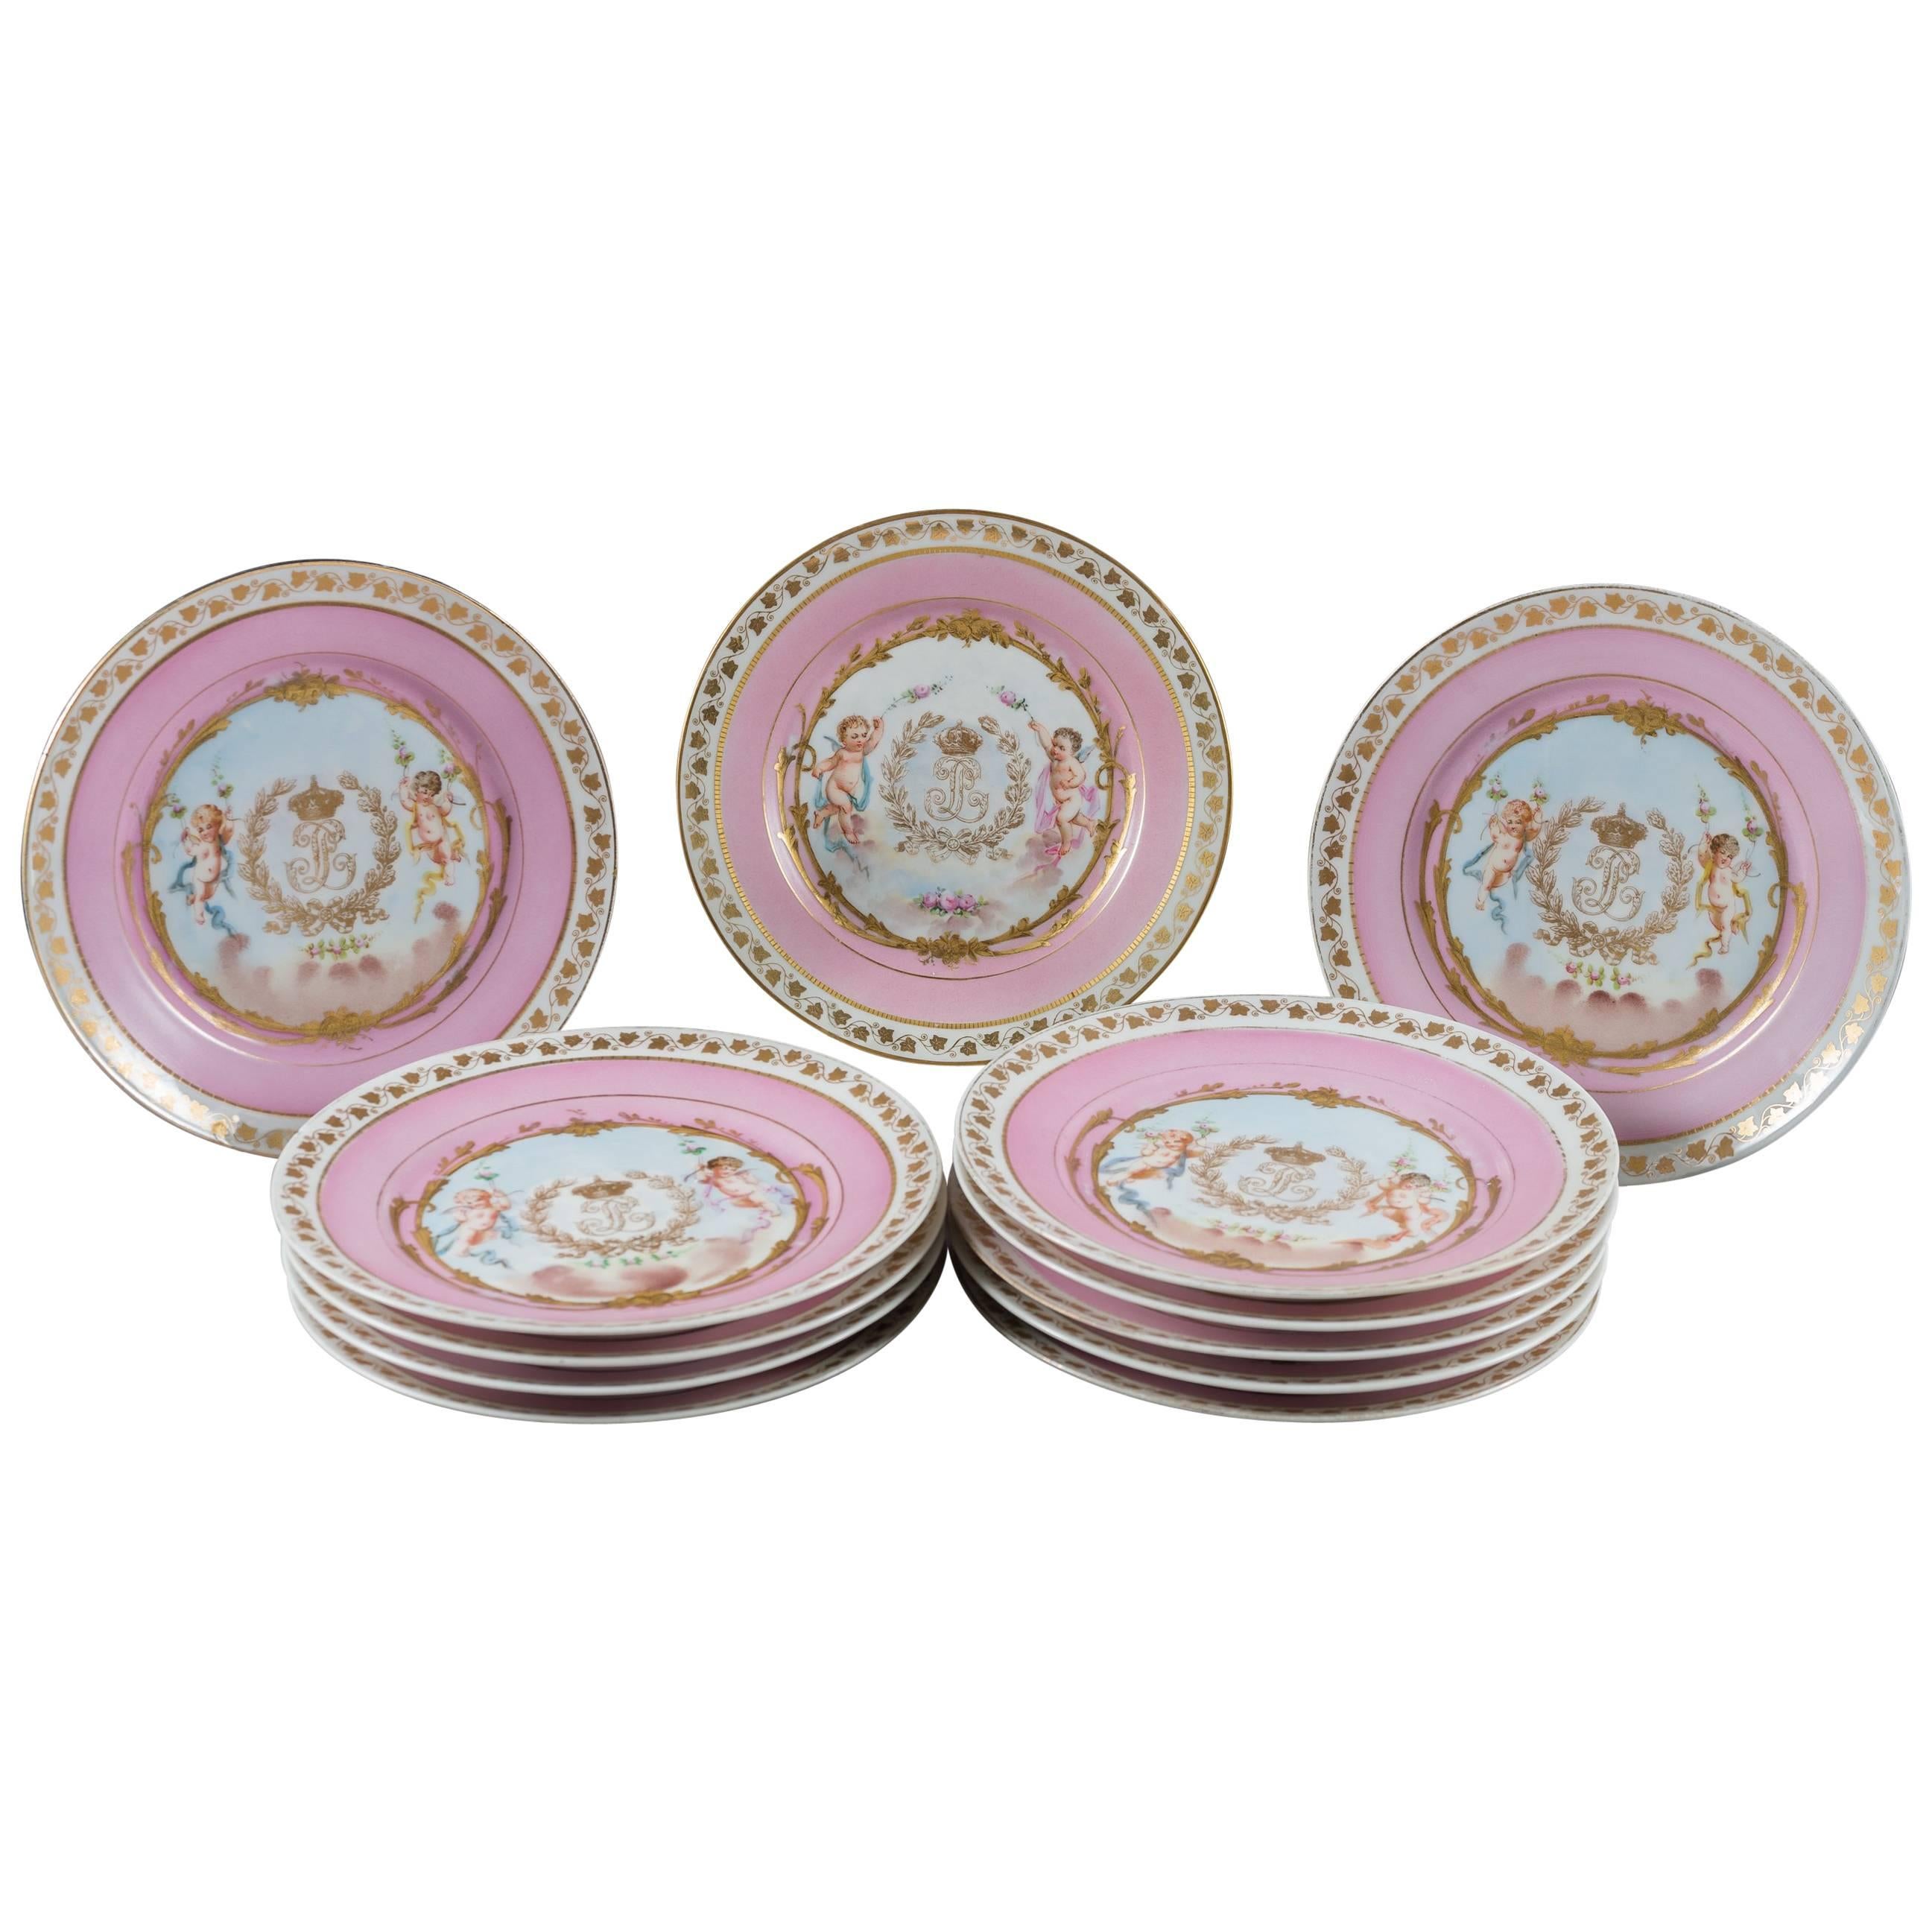 Set of 12 French Sevres Pink Ground Porcelain Painted Plates